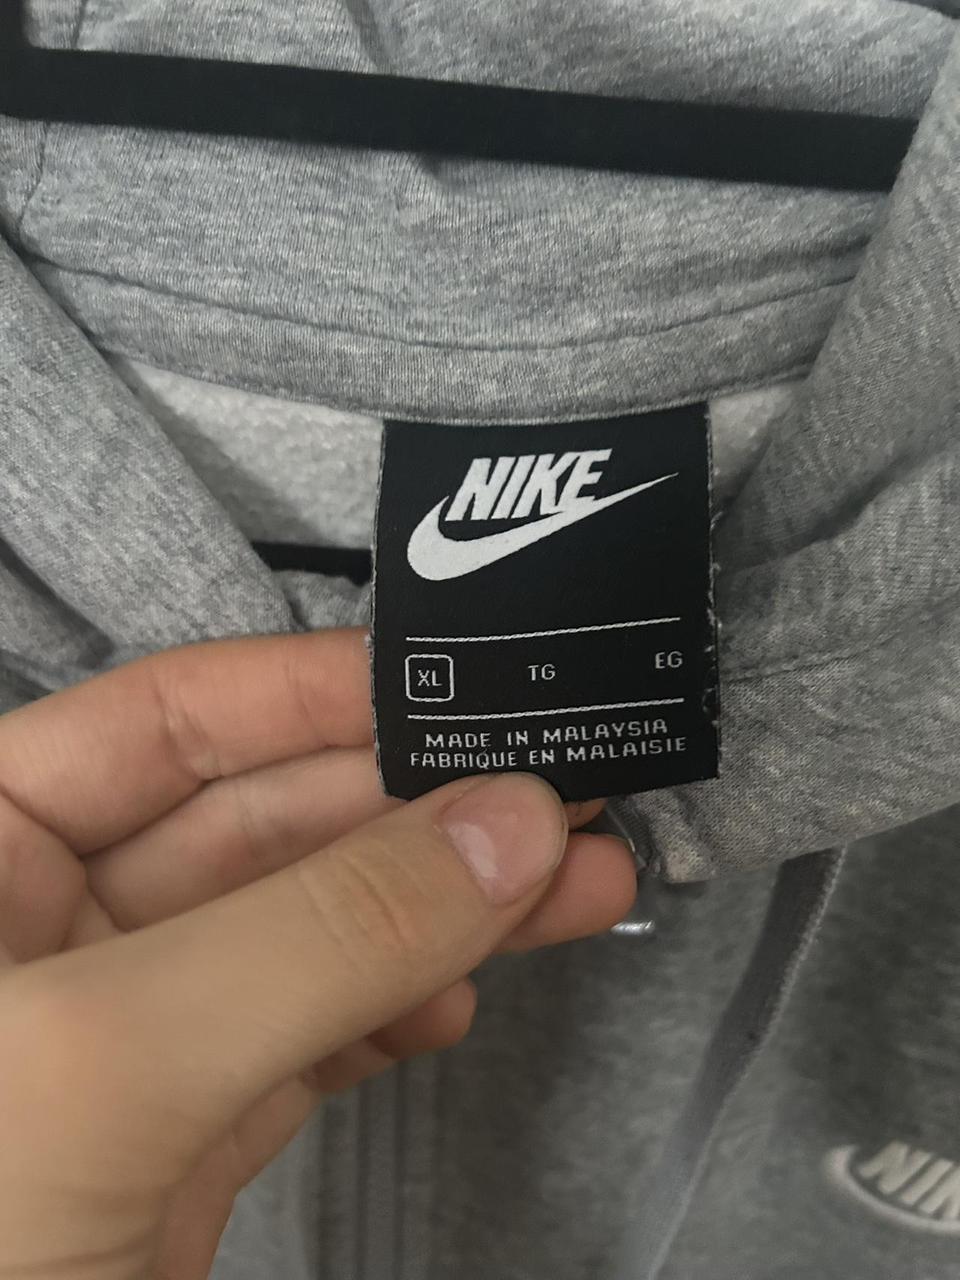 Perfect condition Nike grey zip up jumper!! - Depop